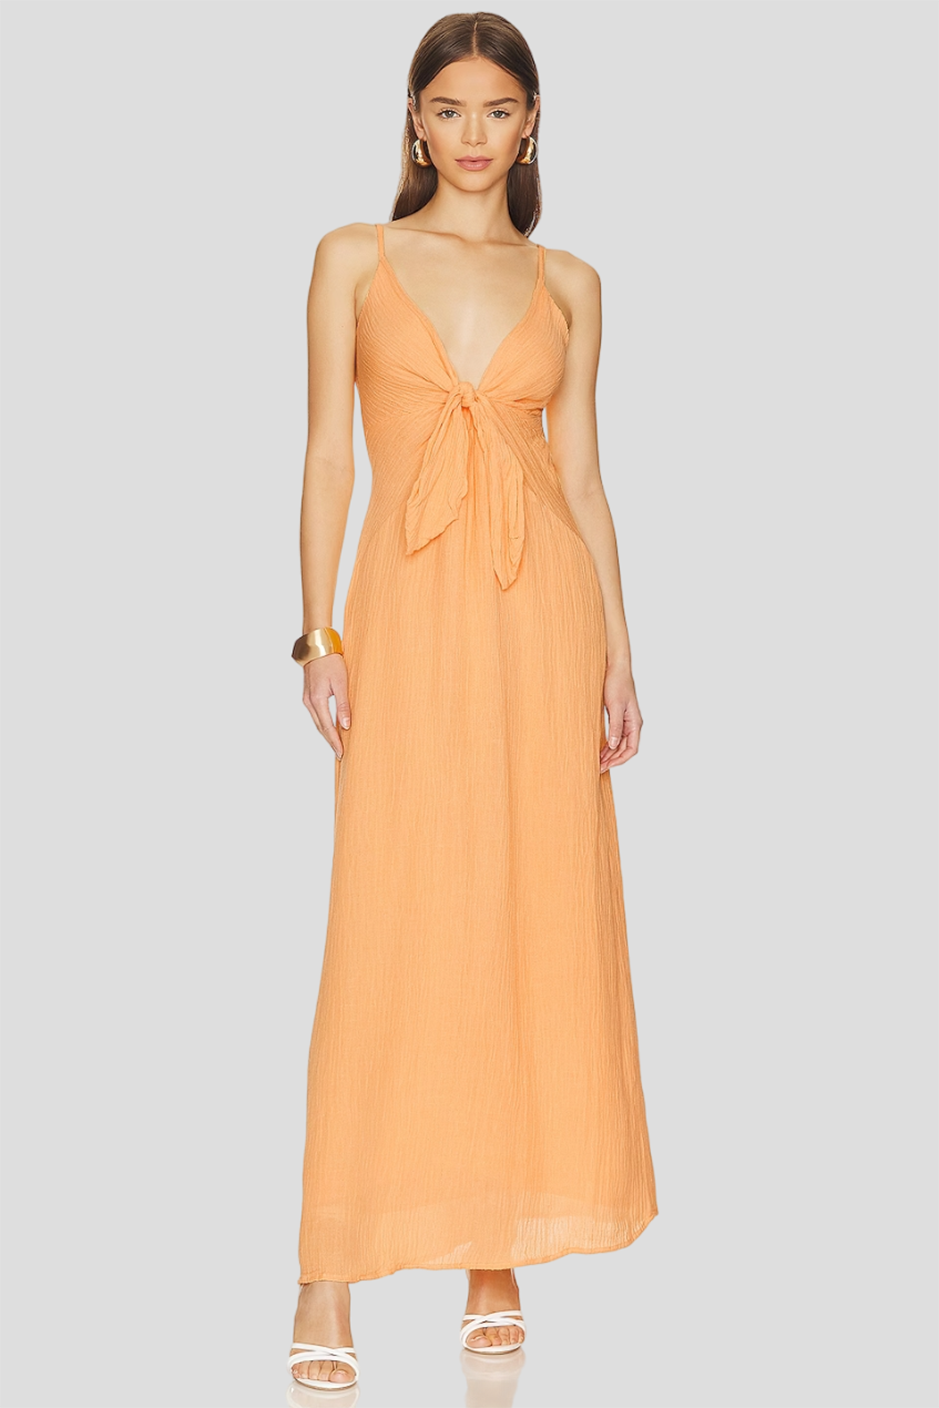 Peach bridesmaid dress from Faithfull the Brand/ Revolve with maxi length and front tie design 